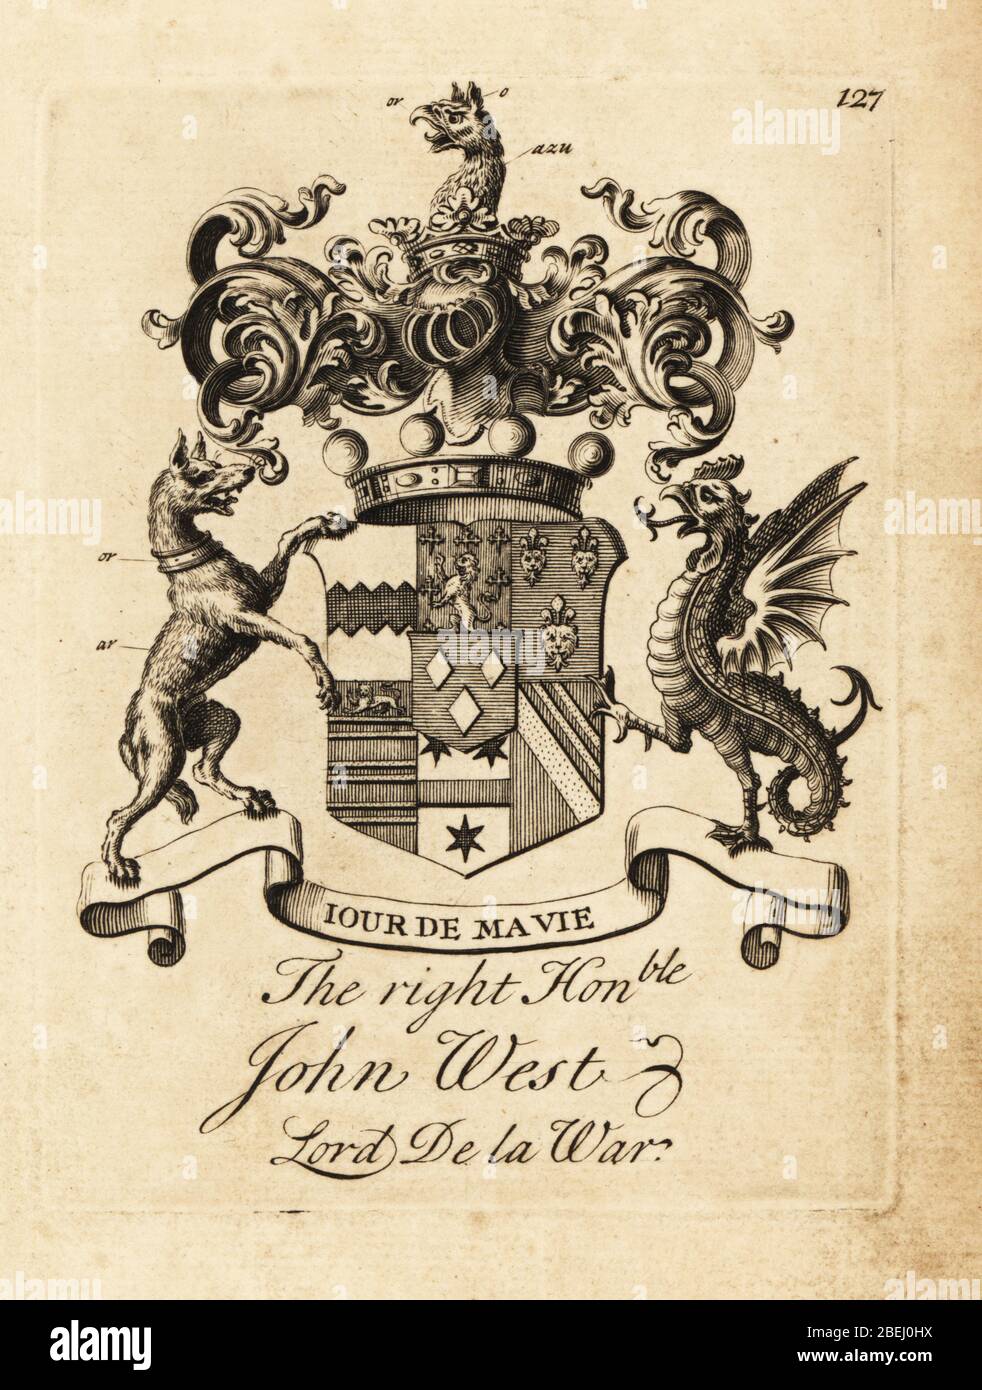 Coat of arms of the Right Honourable John West, 1st Earl De La Warr, Lord de la War, 1693-1766, Copperplate engraving by Andrew Johnston after C. Gardiner from Notitia Anglicana, Shewing the Achievements of all the English Nobility, Andrew Johnson, the Strand, London, 1724. Stock Photo